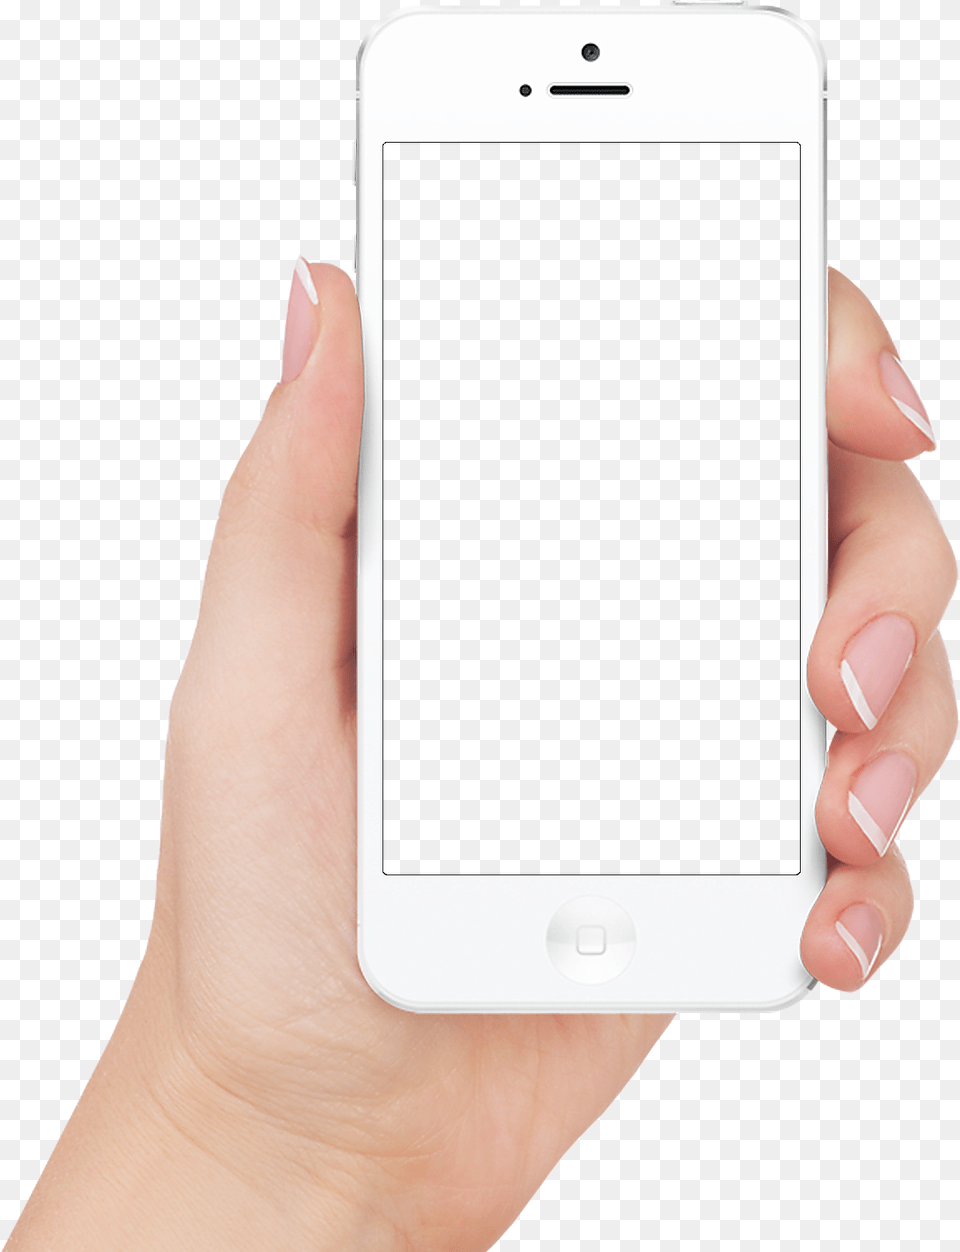 Phone In Hand Hand Holding Iphone Transparent Background, Electronics, Mobile Phone Free Png Download